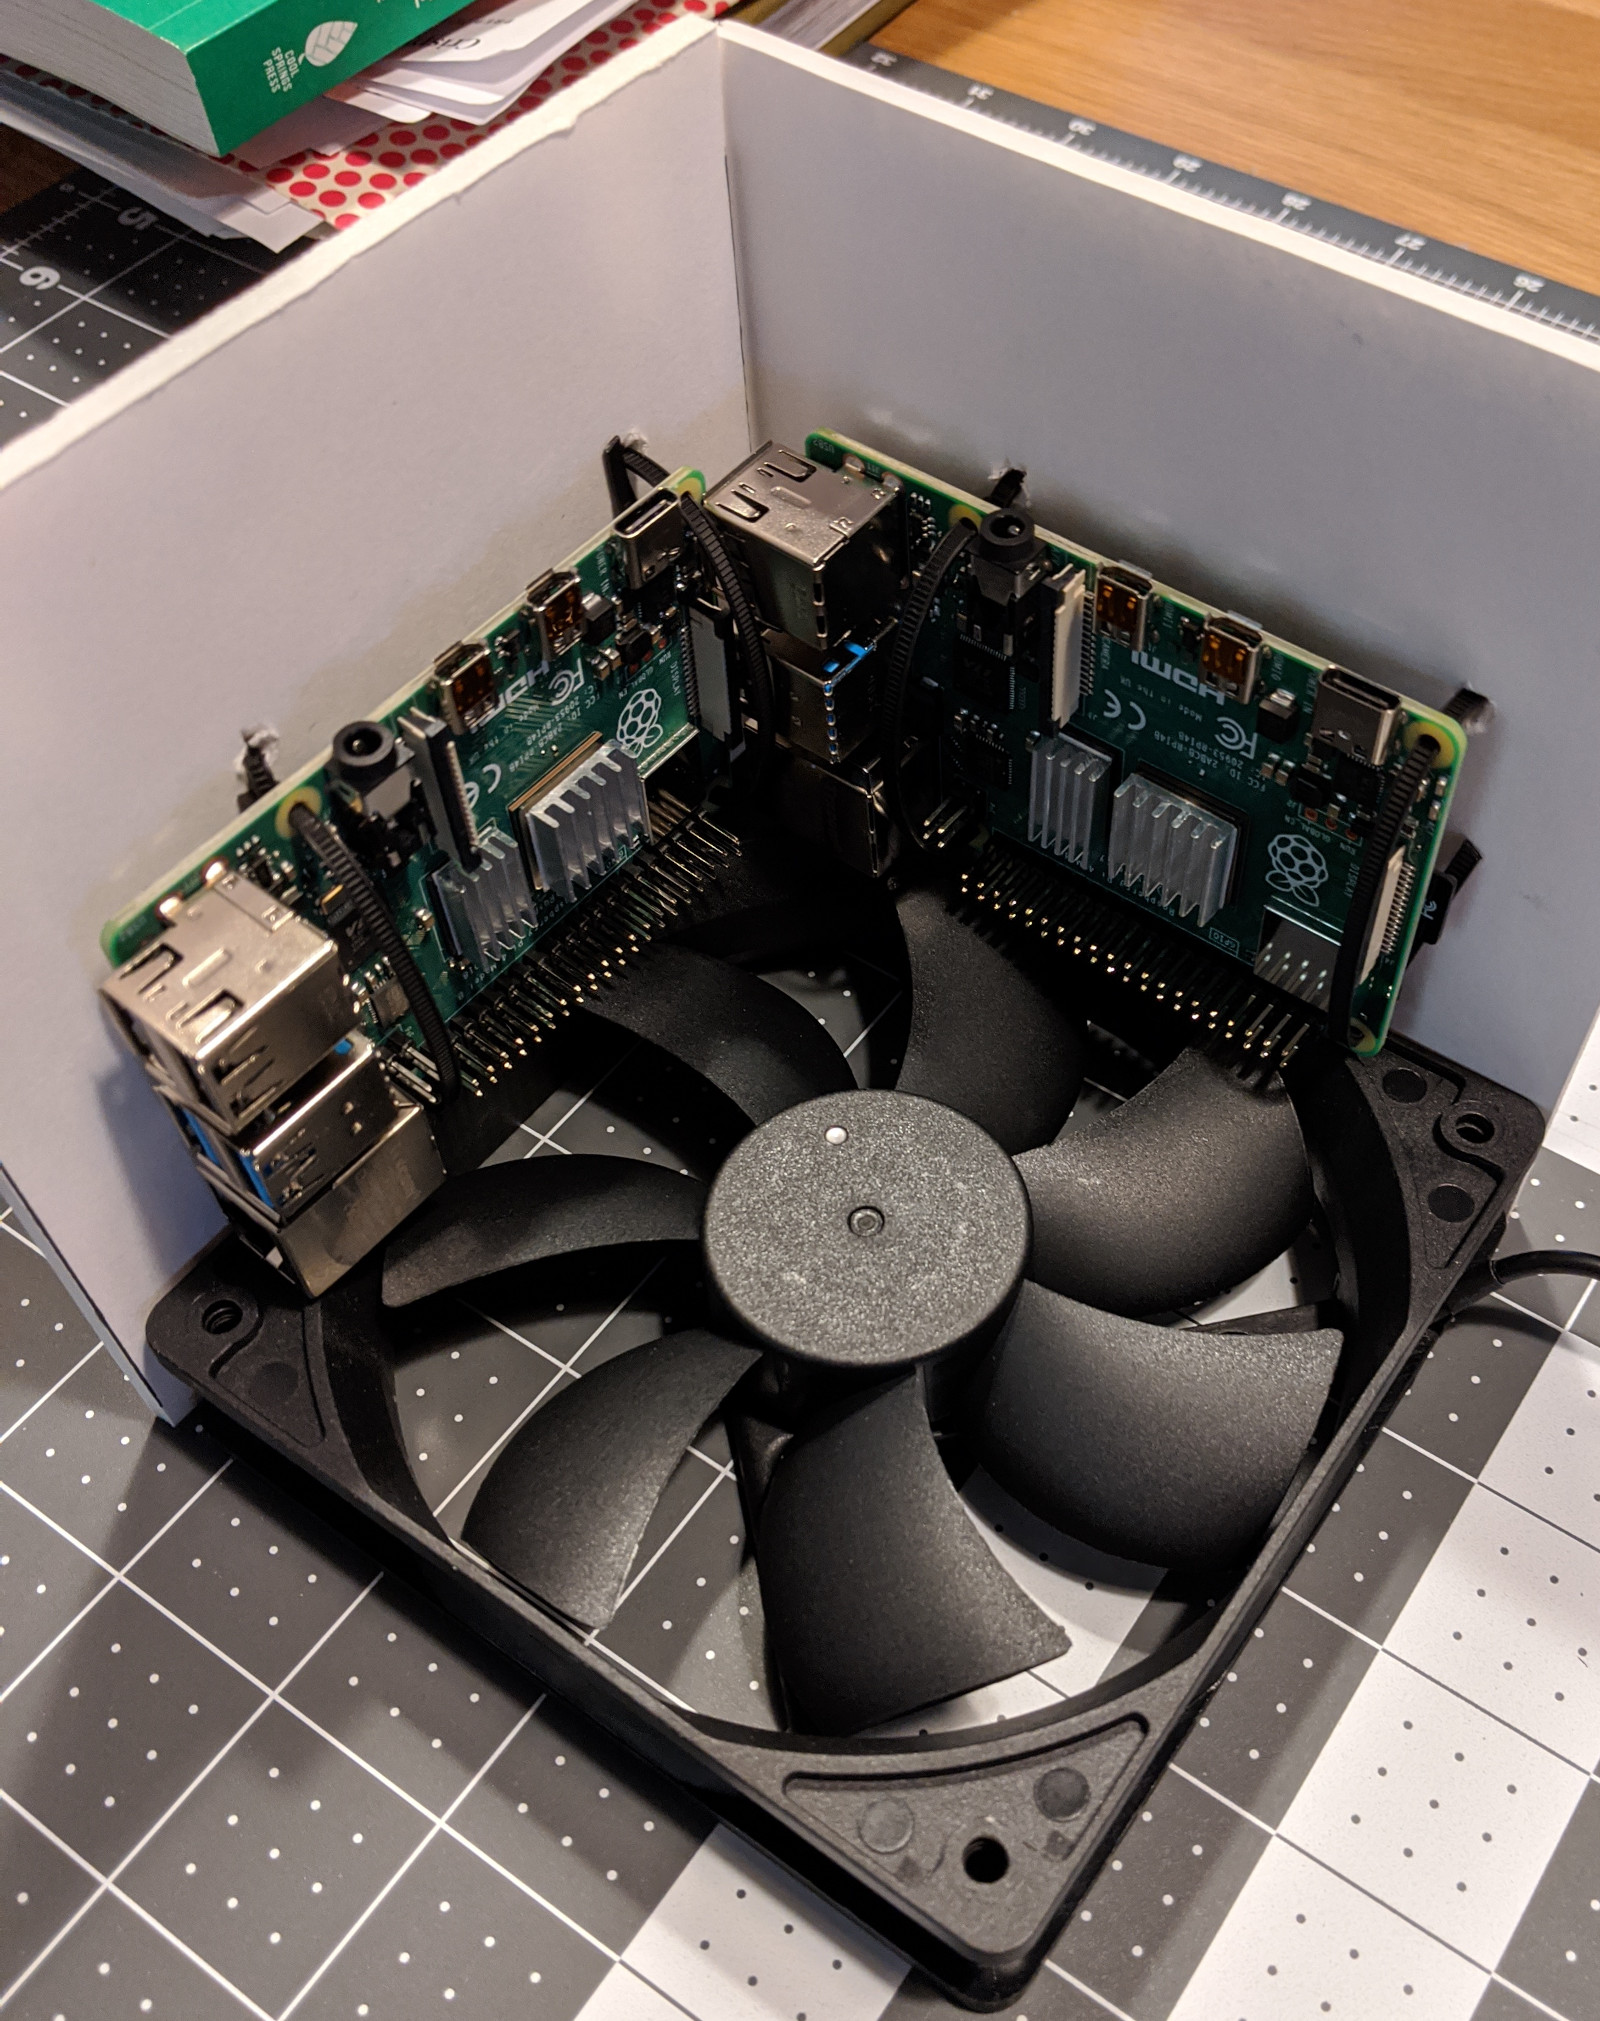 2 boards and the fan